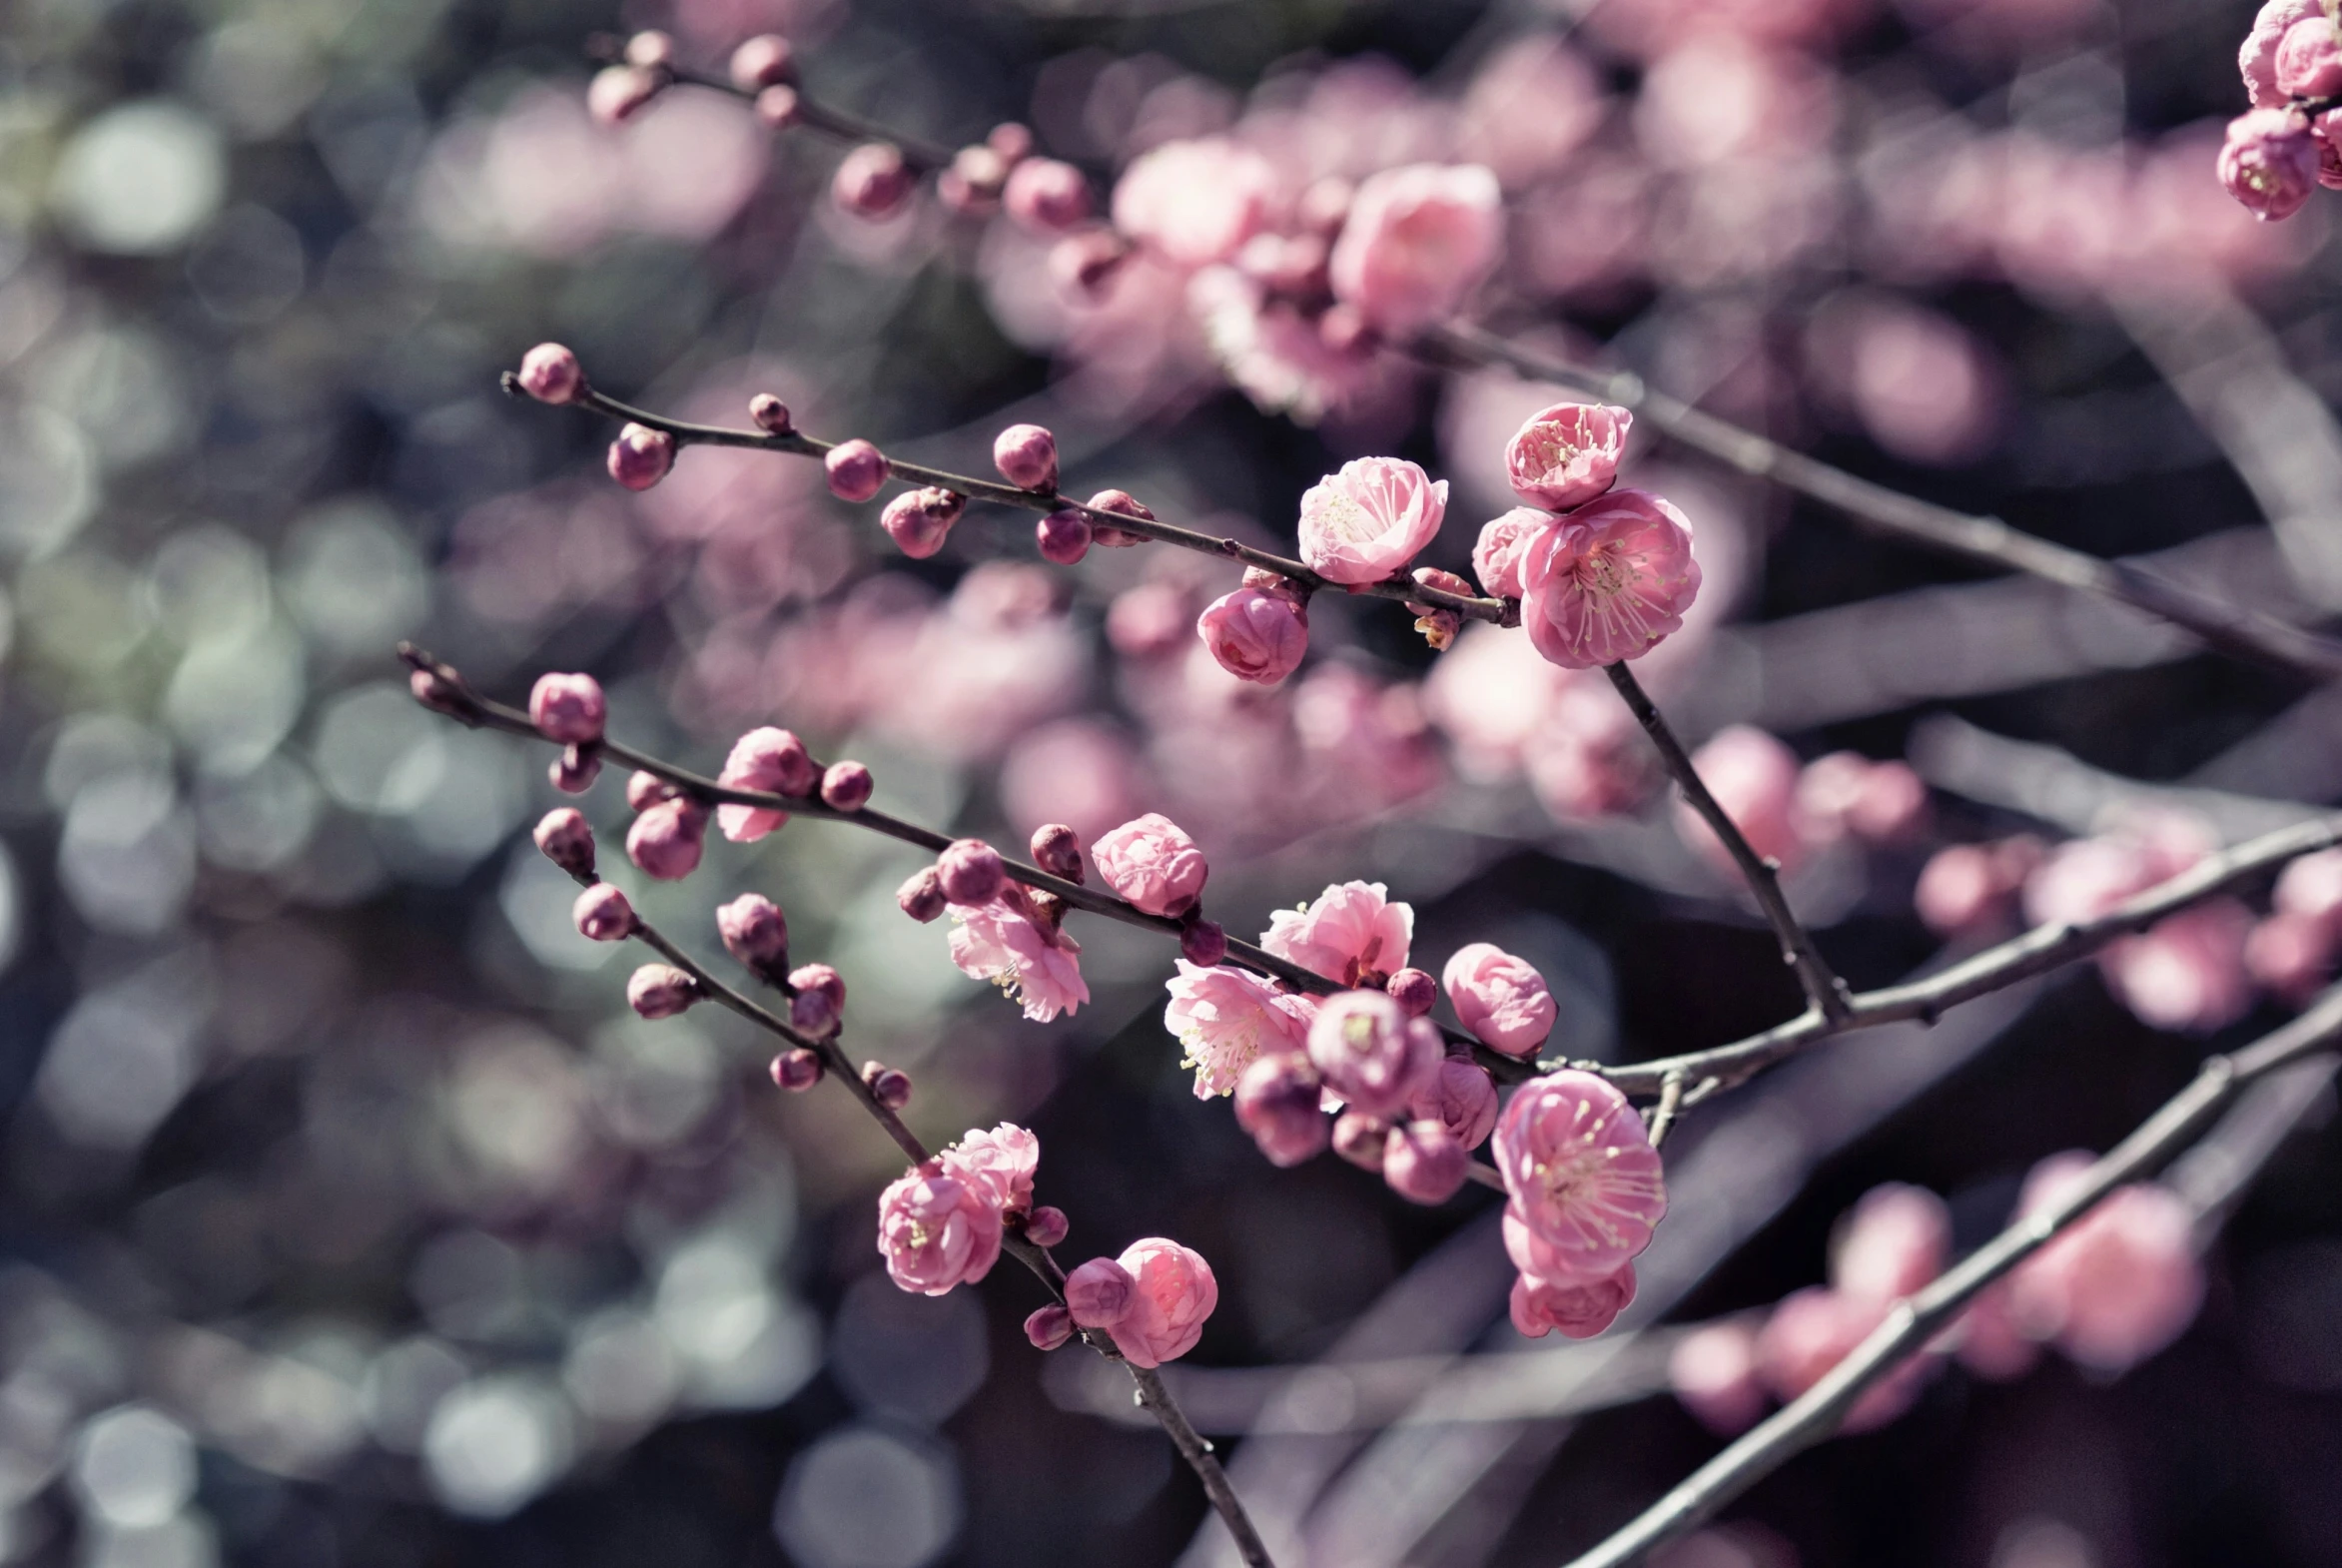 a group of small pink flowers blooming on a tree